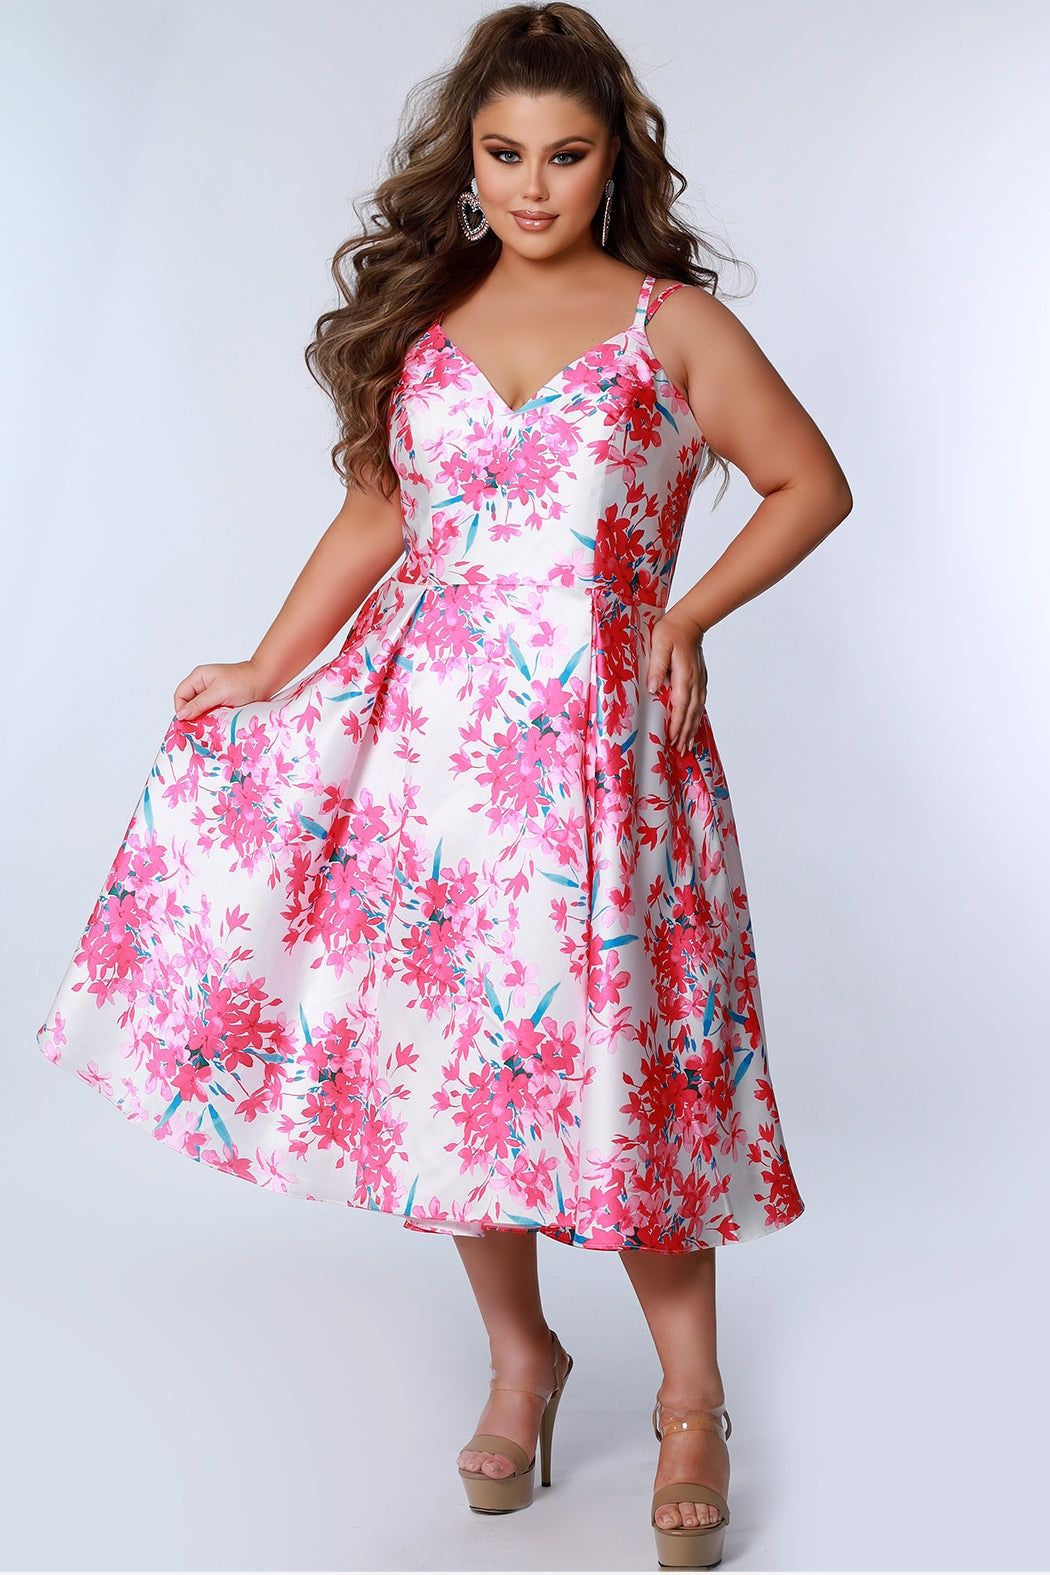 Style CE2209 Sydney's Closet Plus Size 16 Prom Satin Pink Cocktail Dress on Queenly